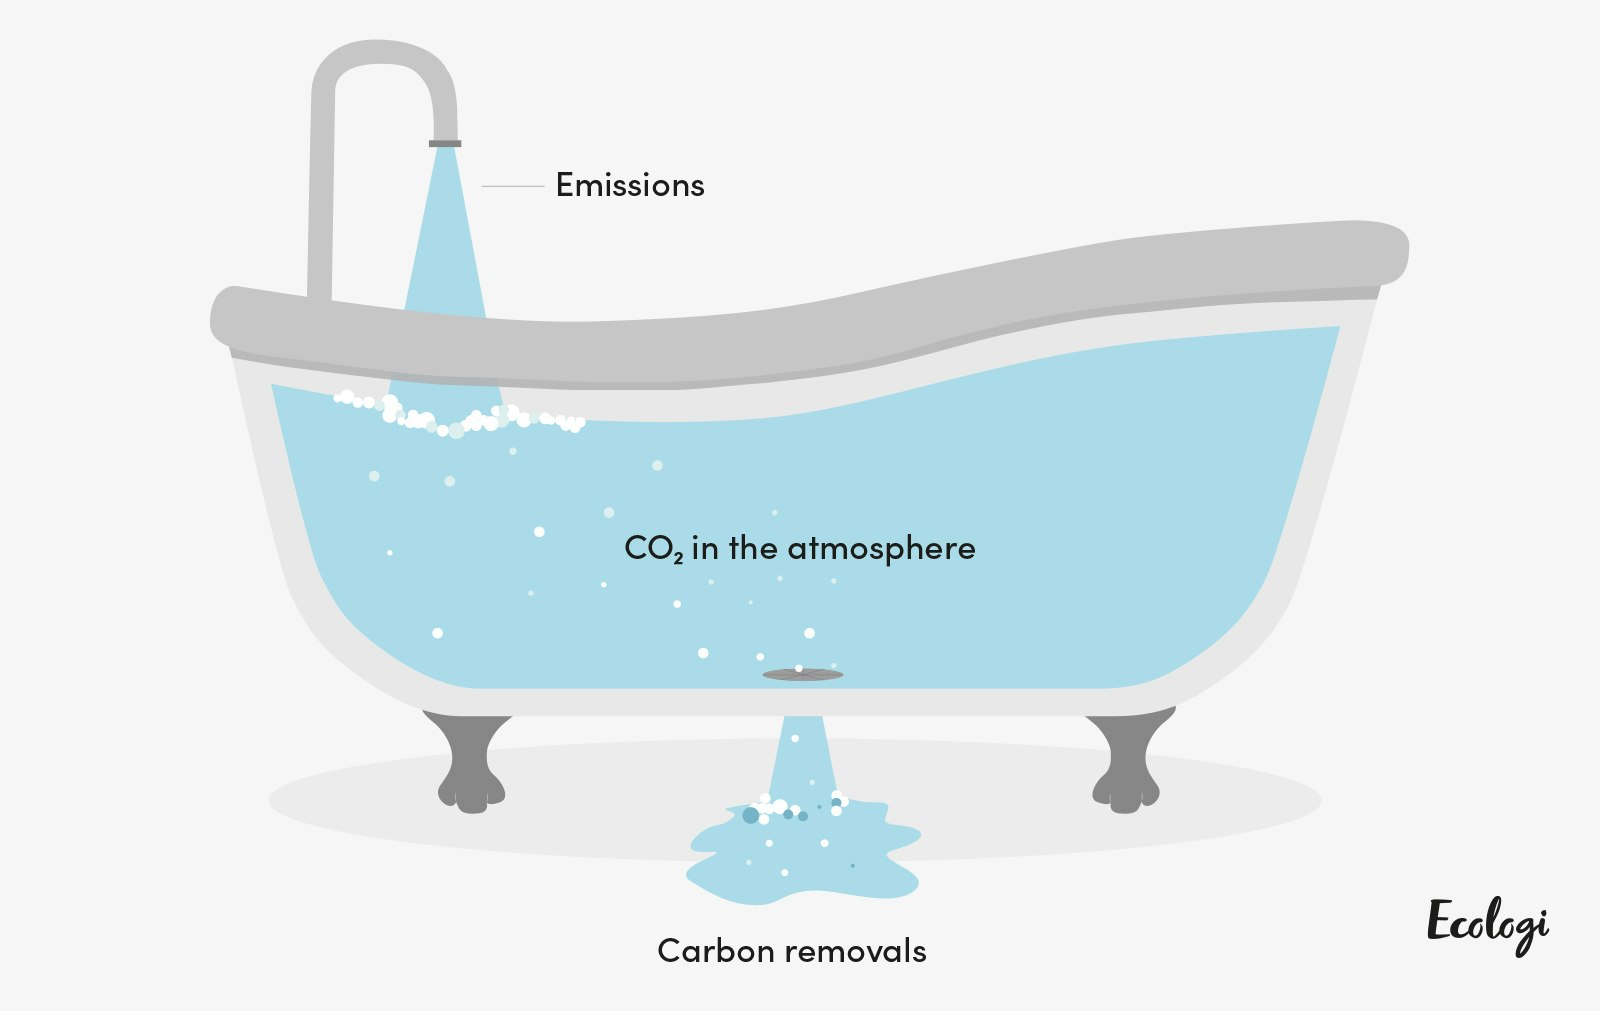 A diagram which demonstrates how emissions increase CO2e in the atmosphere and carbon removals decrease CO2e in the atmosphere.